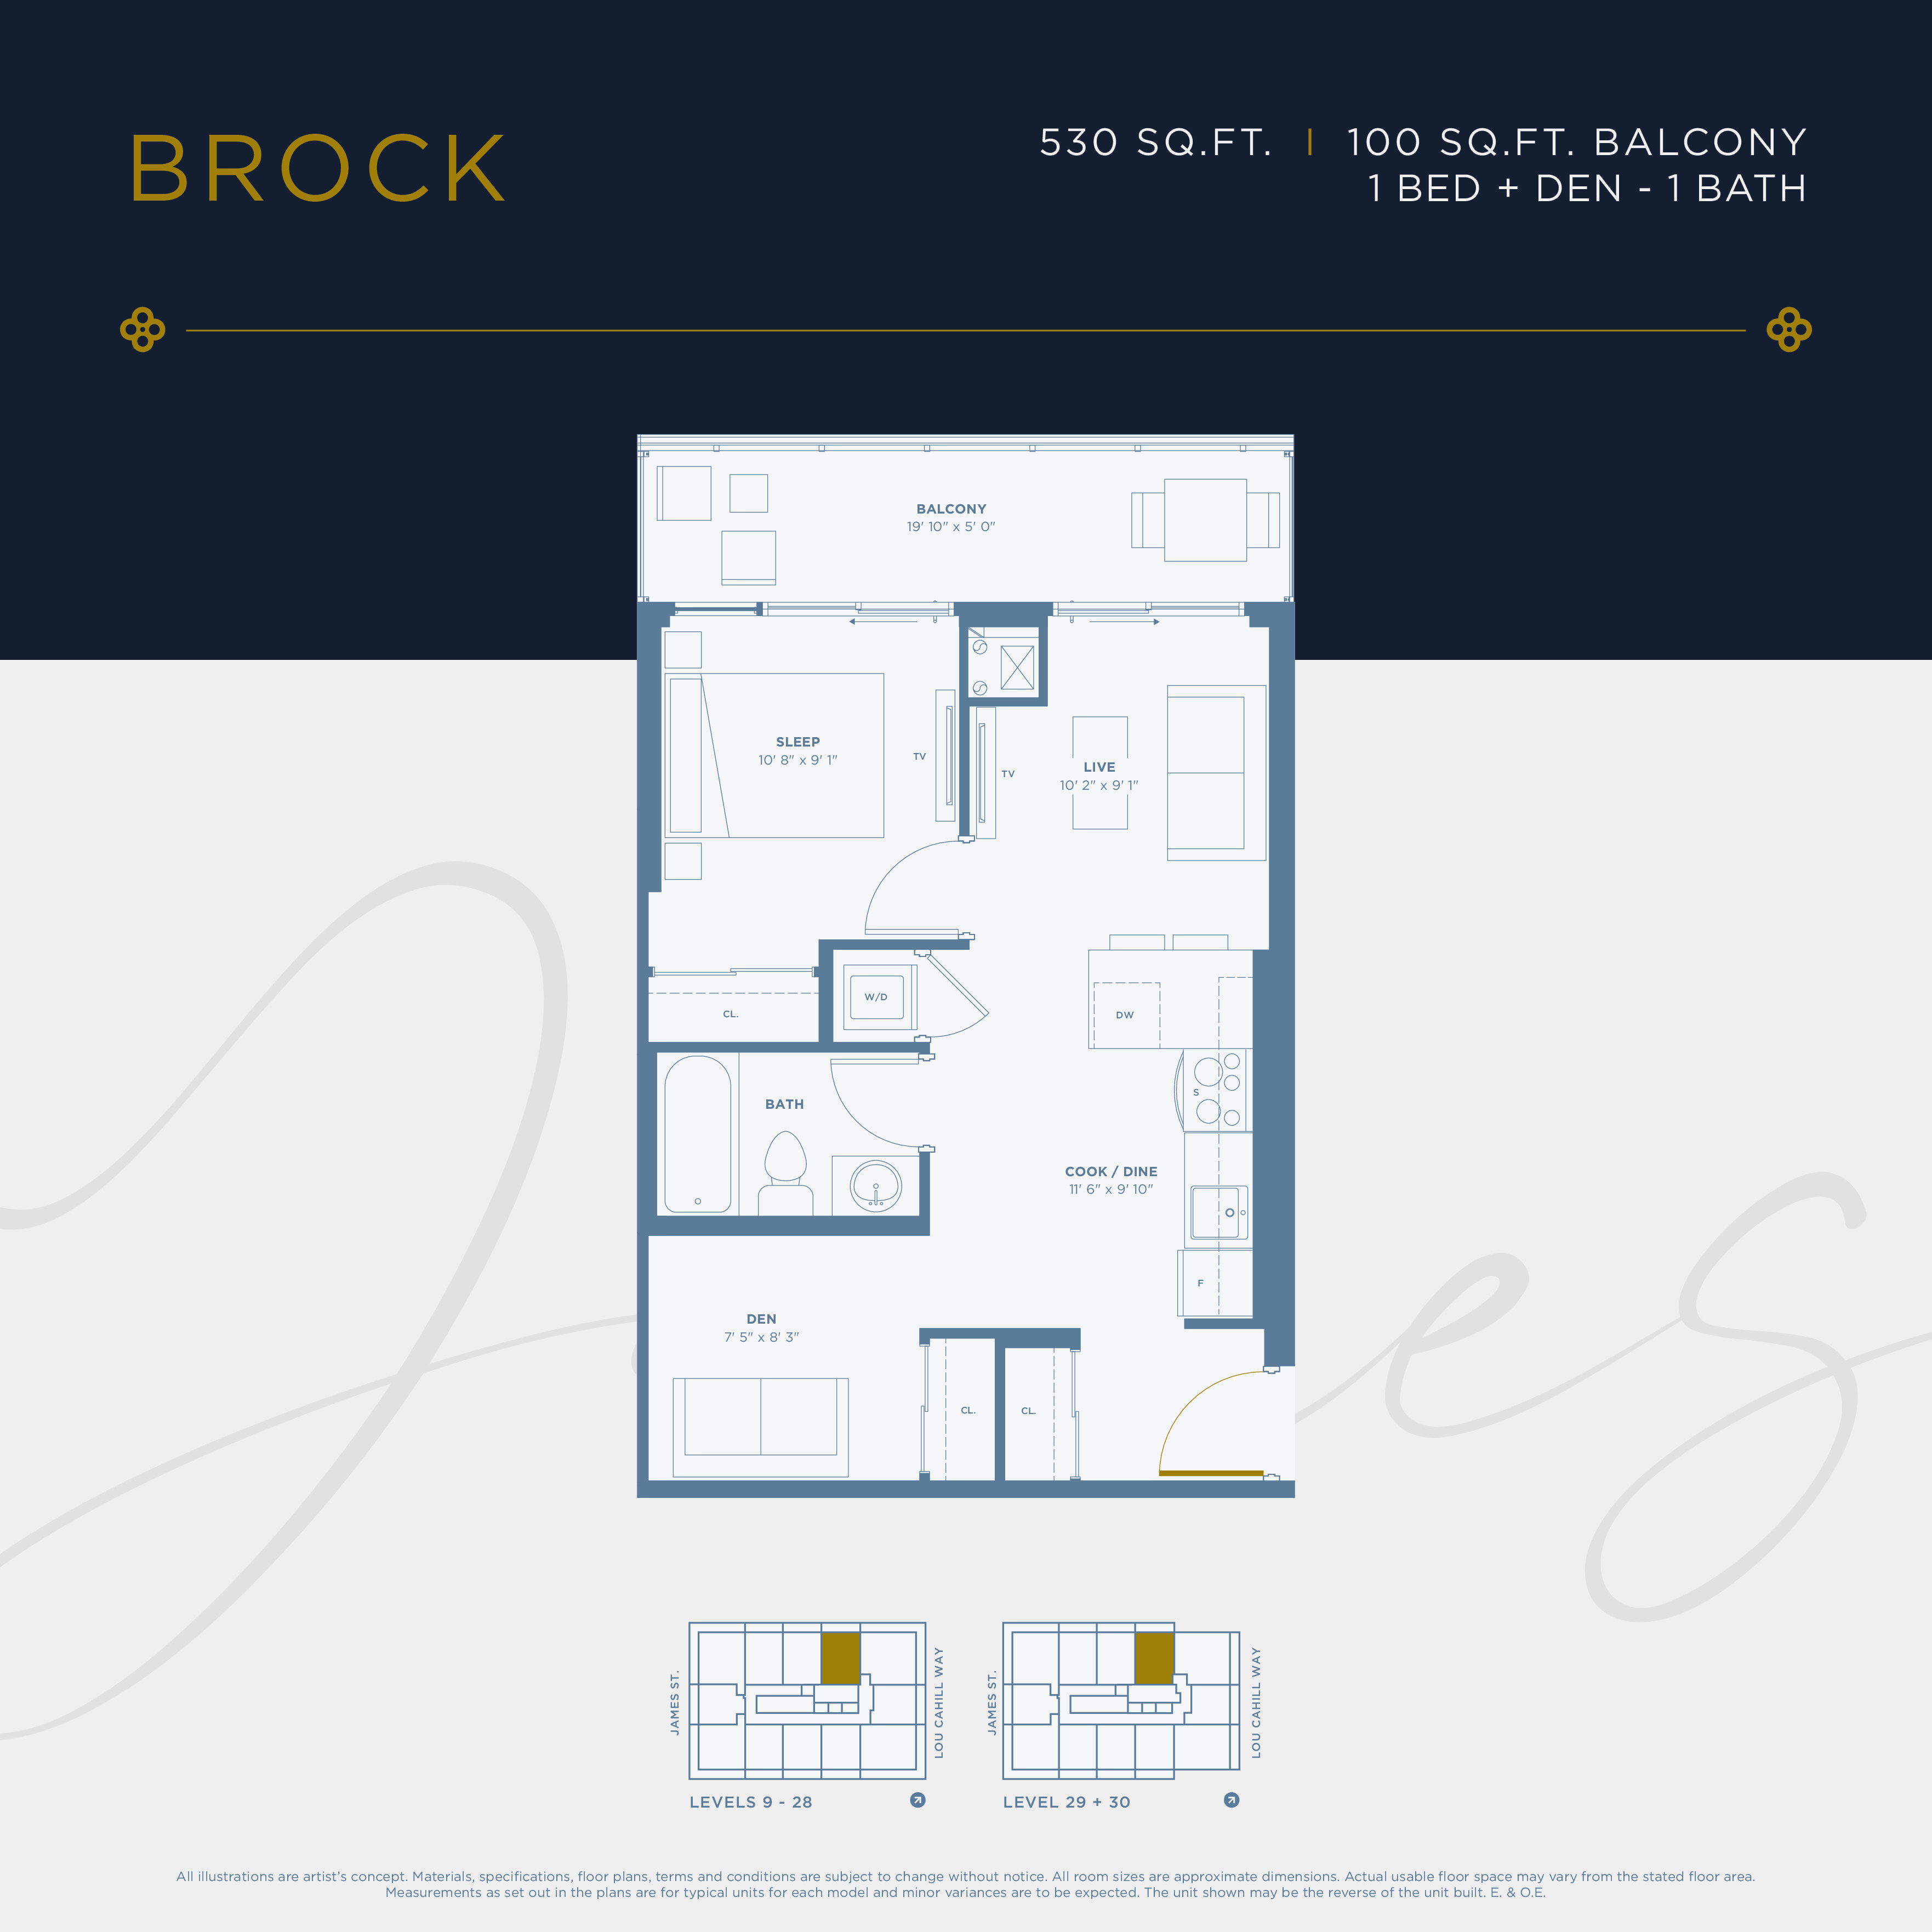  Floor Plan of 88 James condo St Catherines  with undefined beds